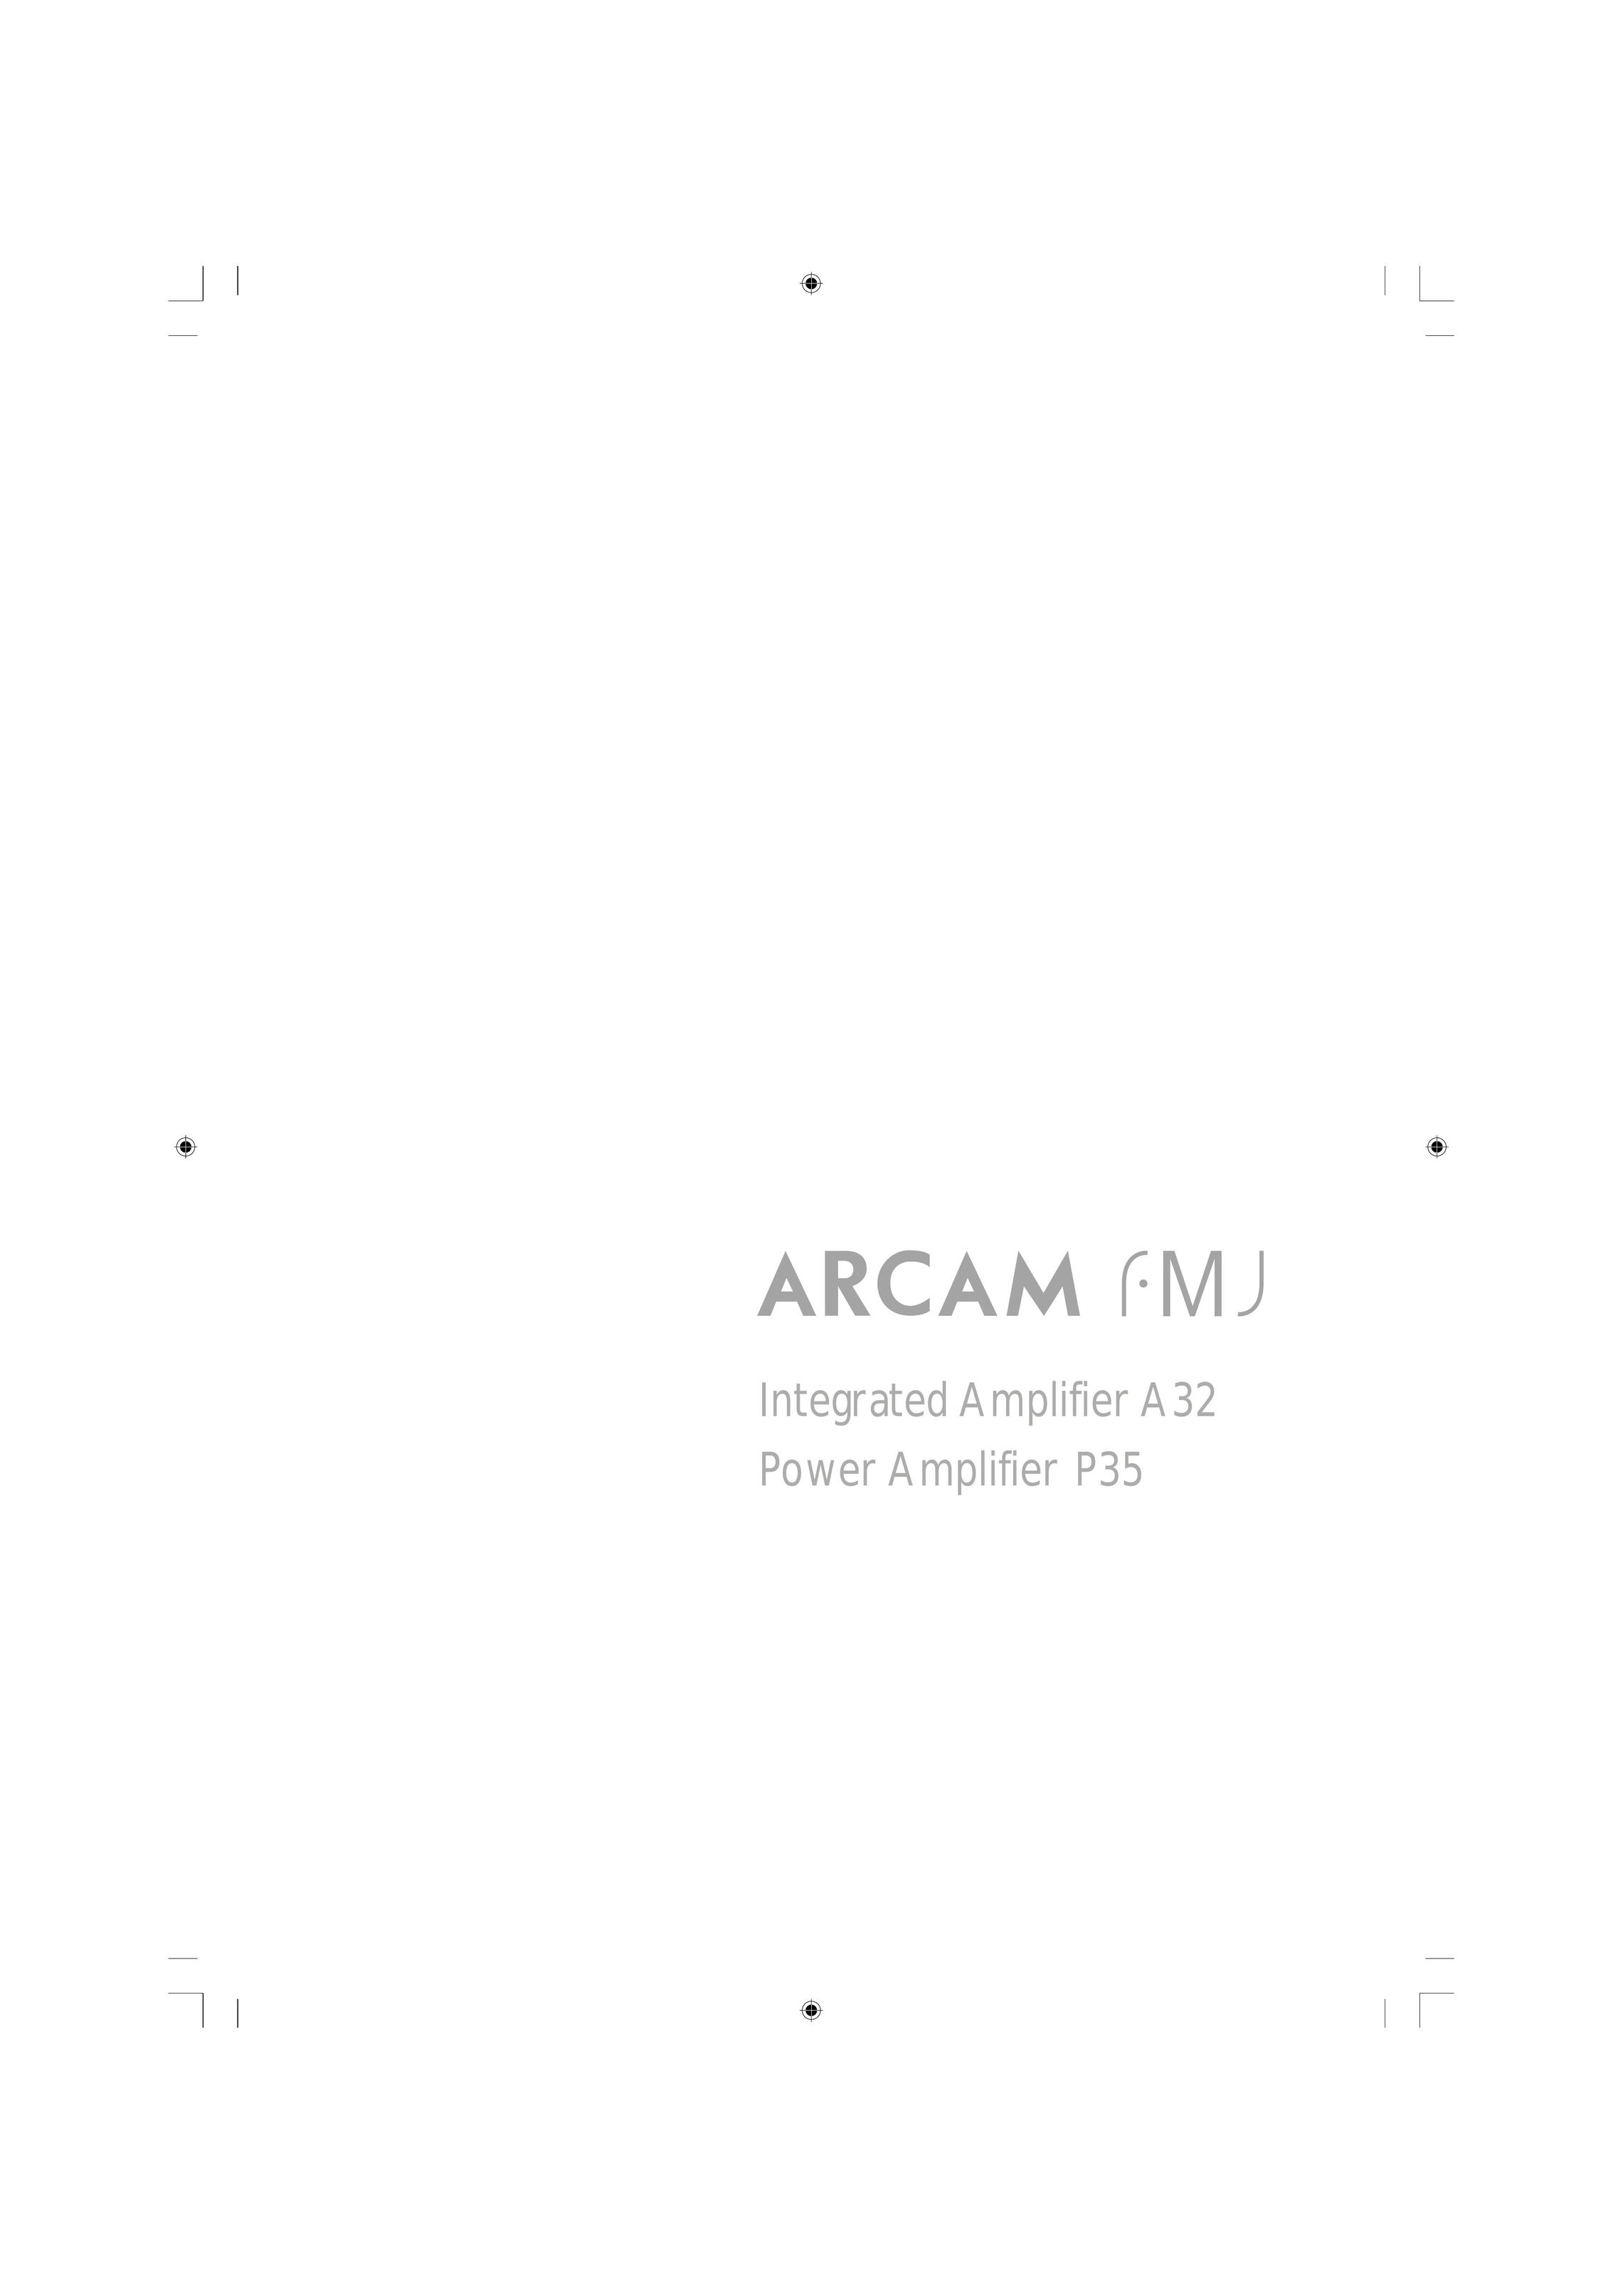 Arcam A32 Stereo Amplifier User Manual